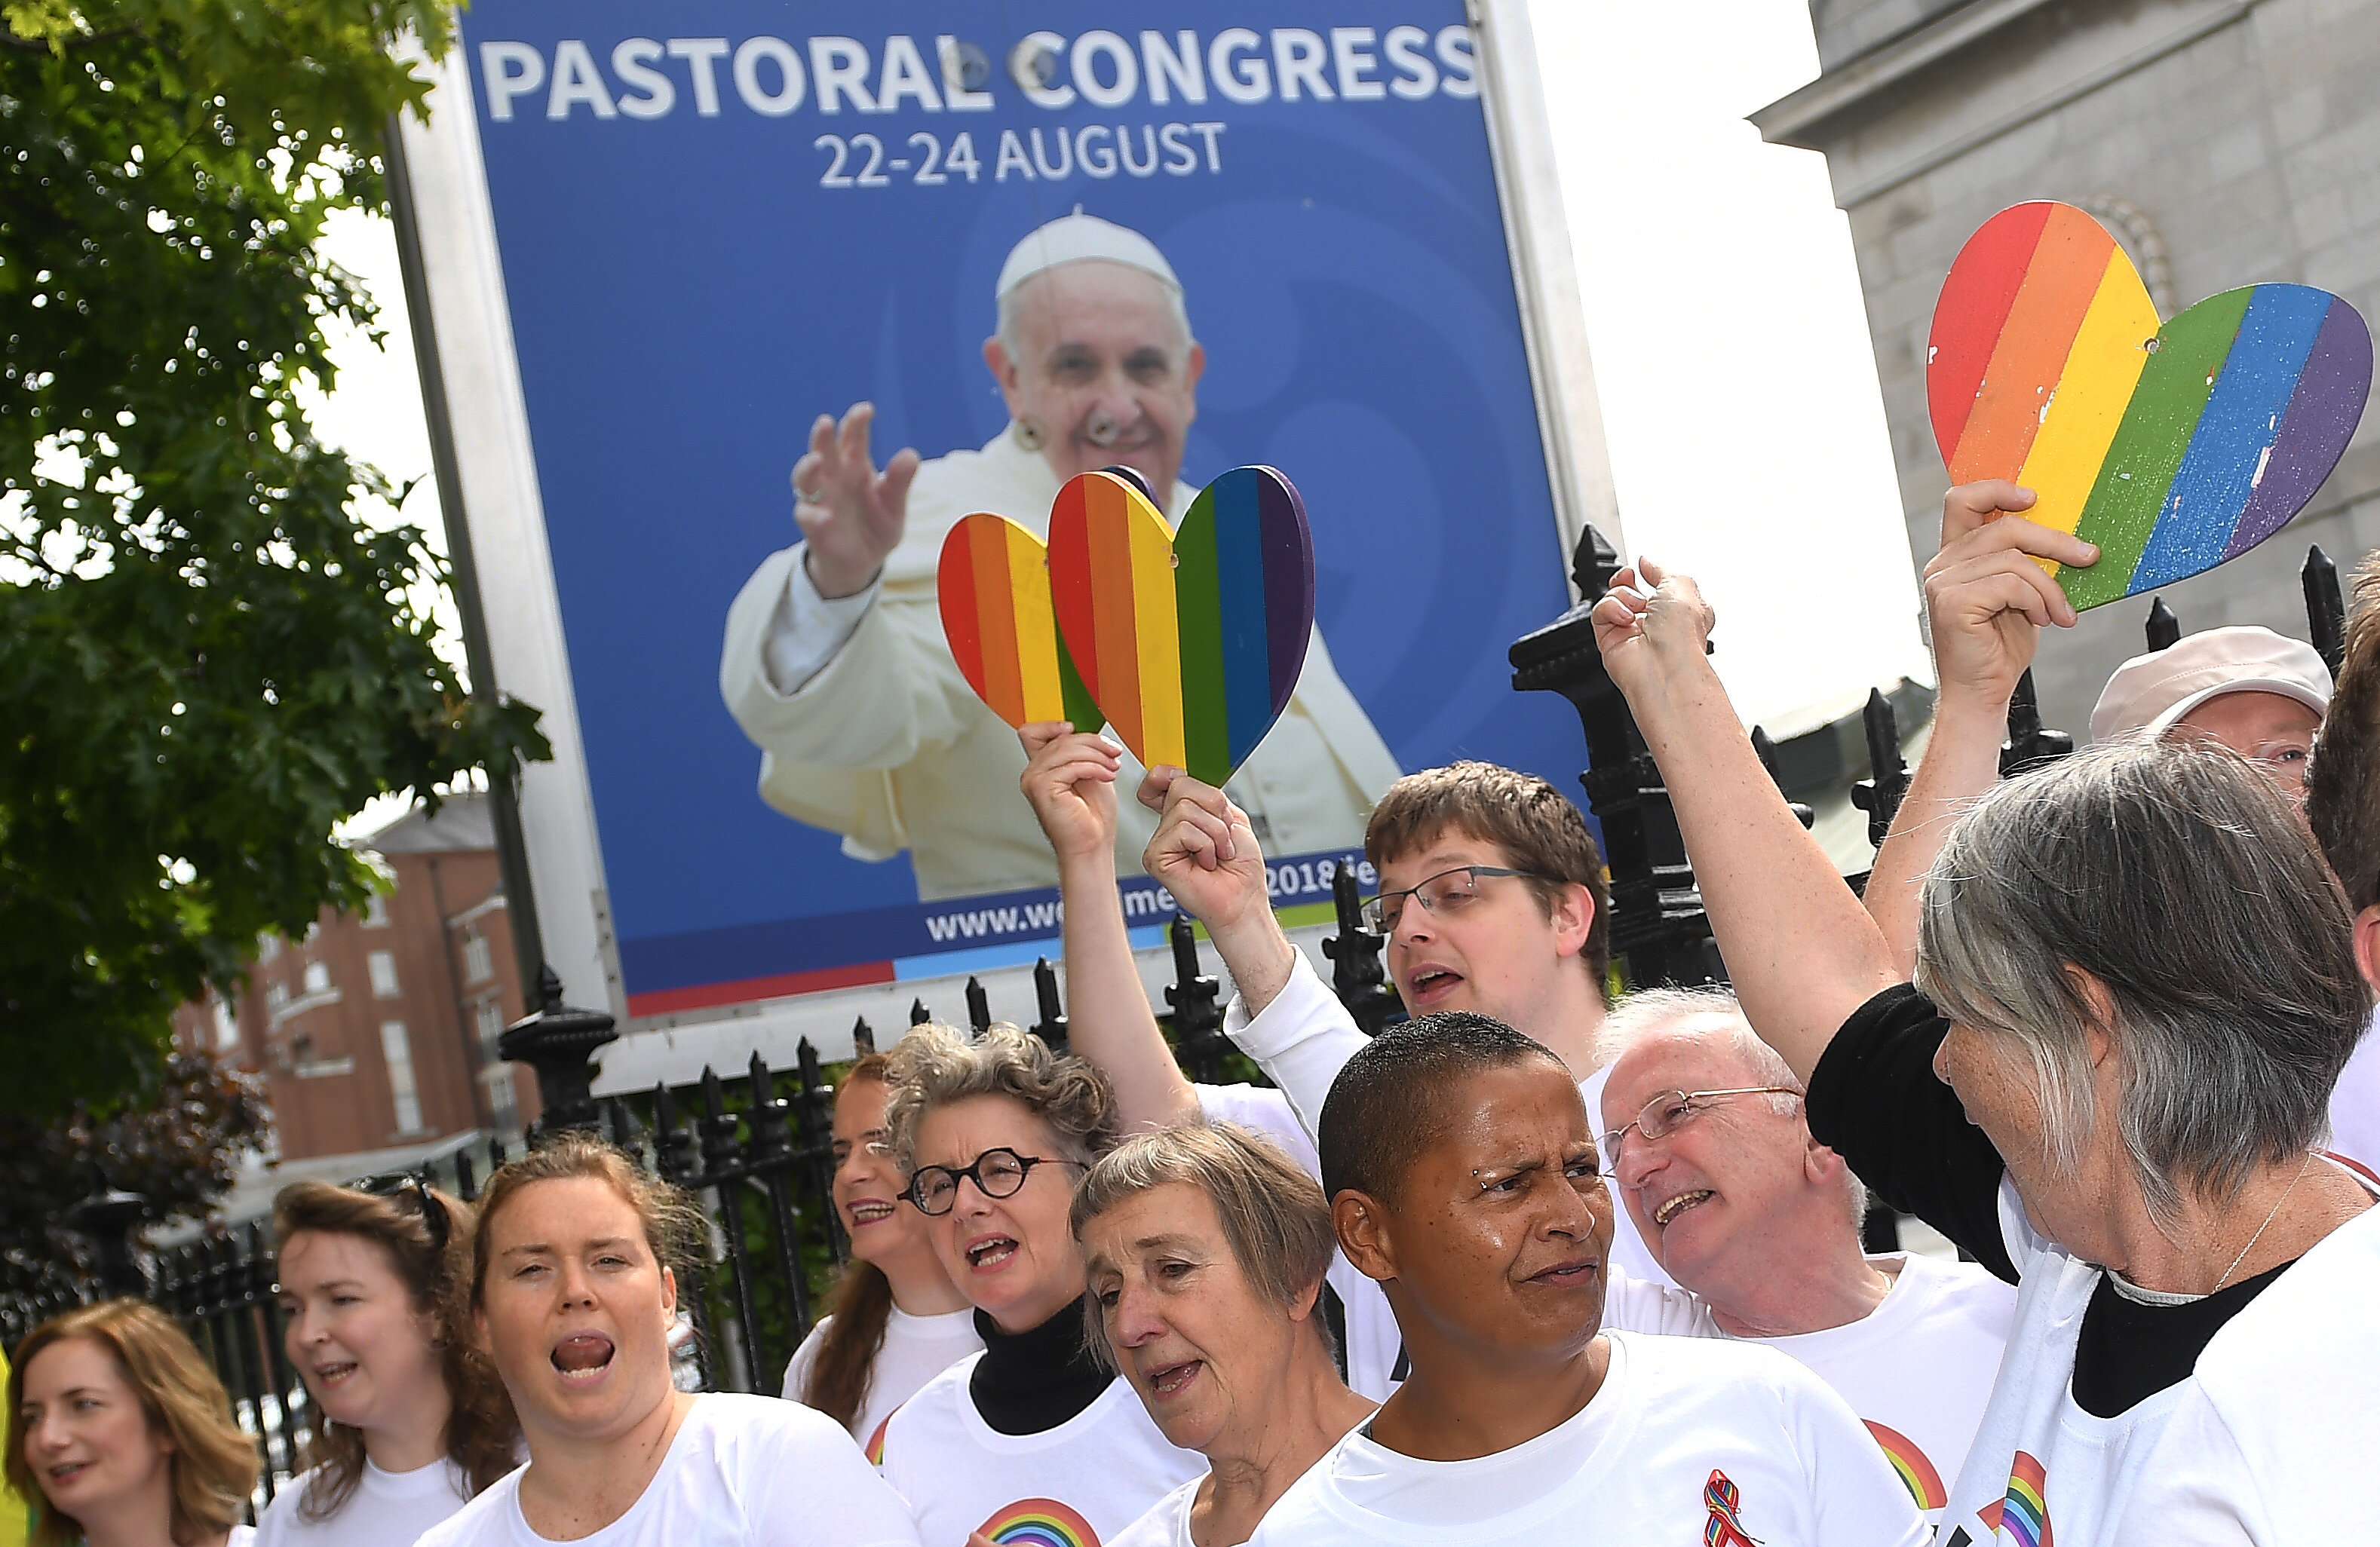 Most Catholics want change in approach towards LGBT people, finds poll  